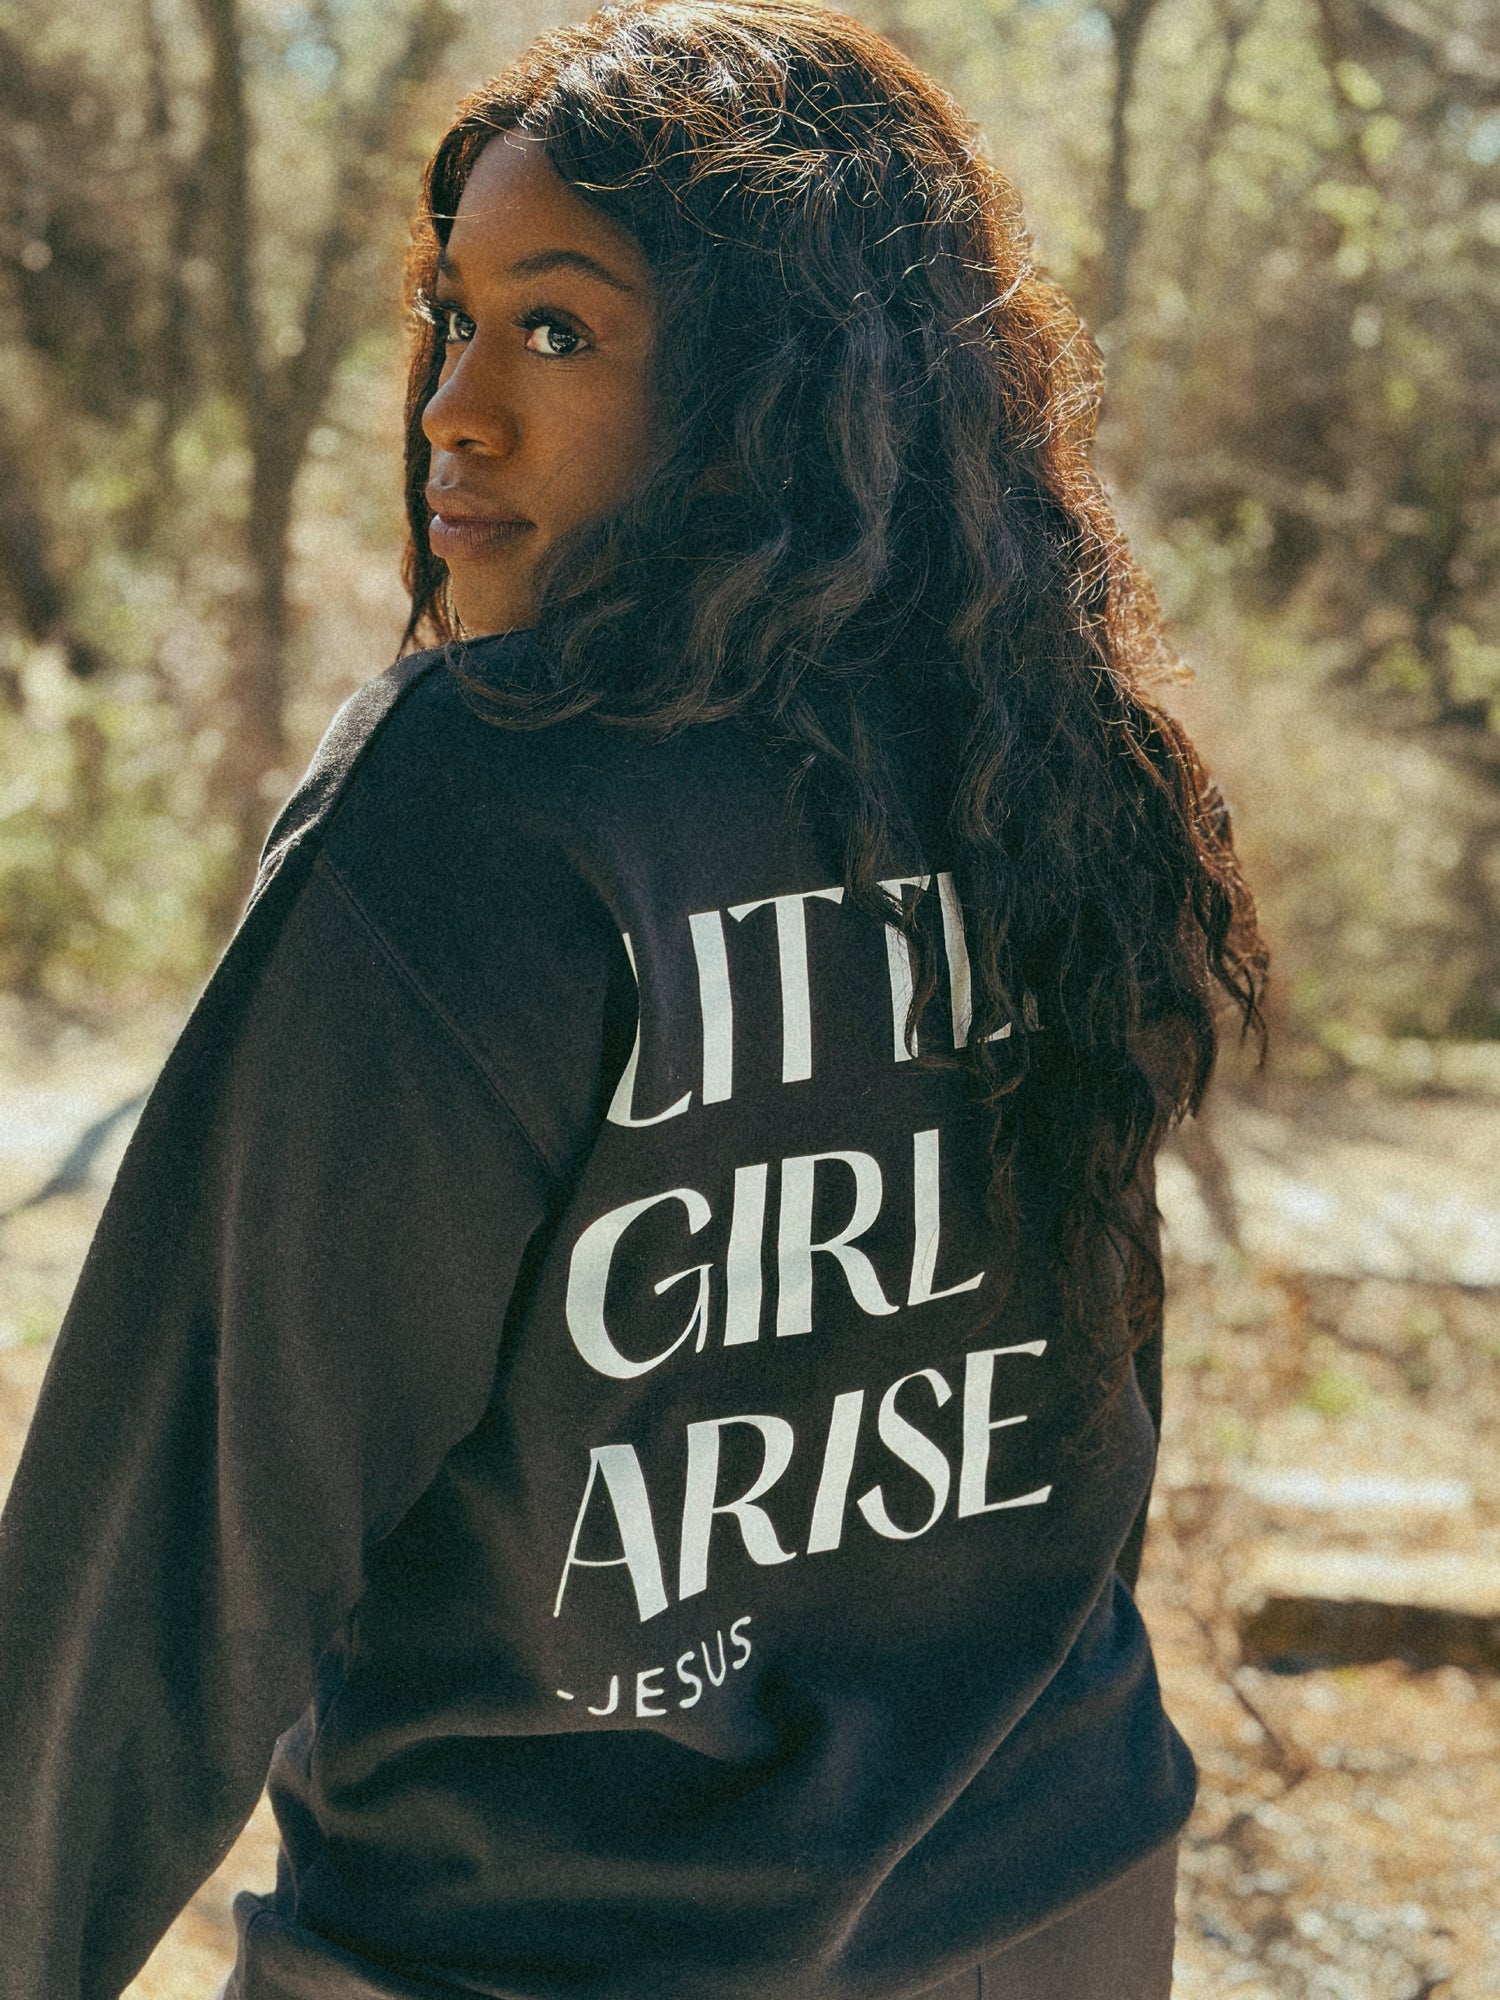 Talitha Cumi Sweatshirt Collection Mark 5:41  Little Girl Arise by Crown of Favor Christian Clothing Brand